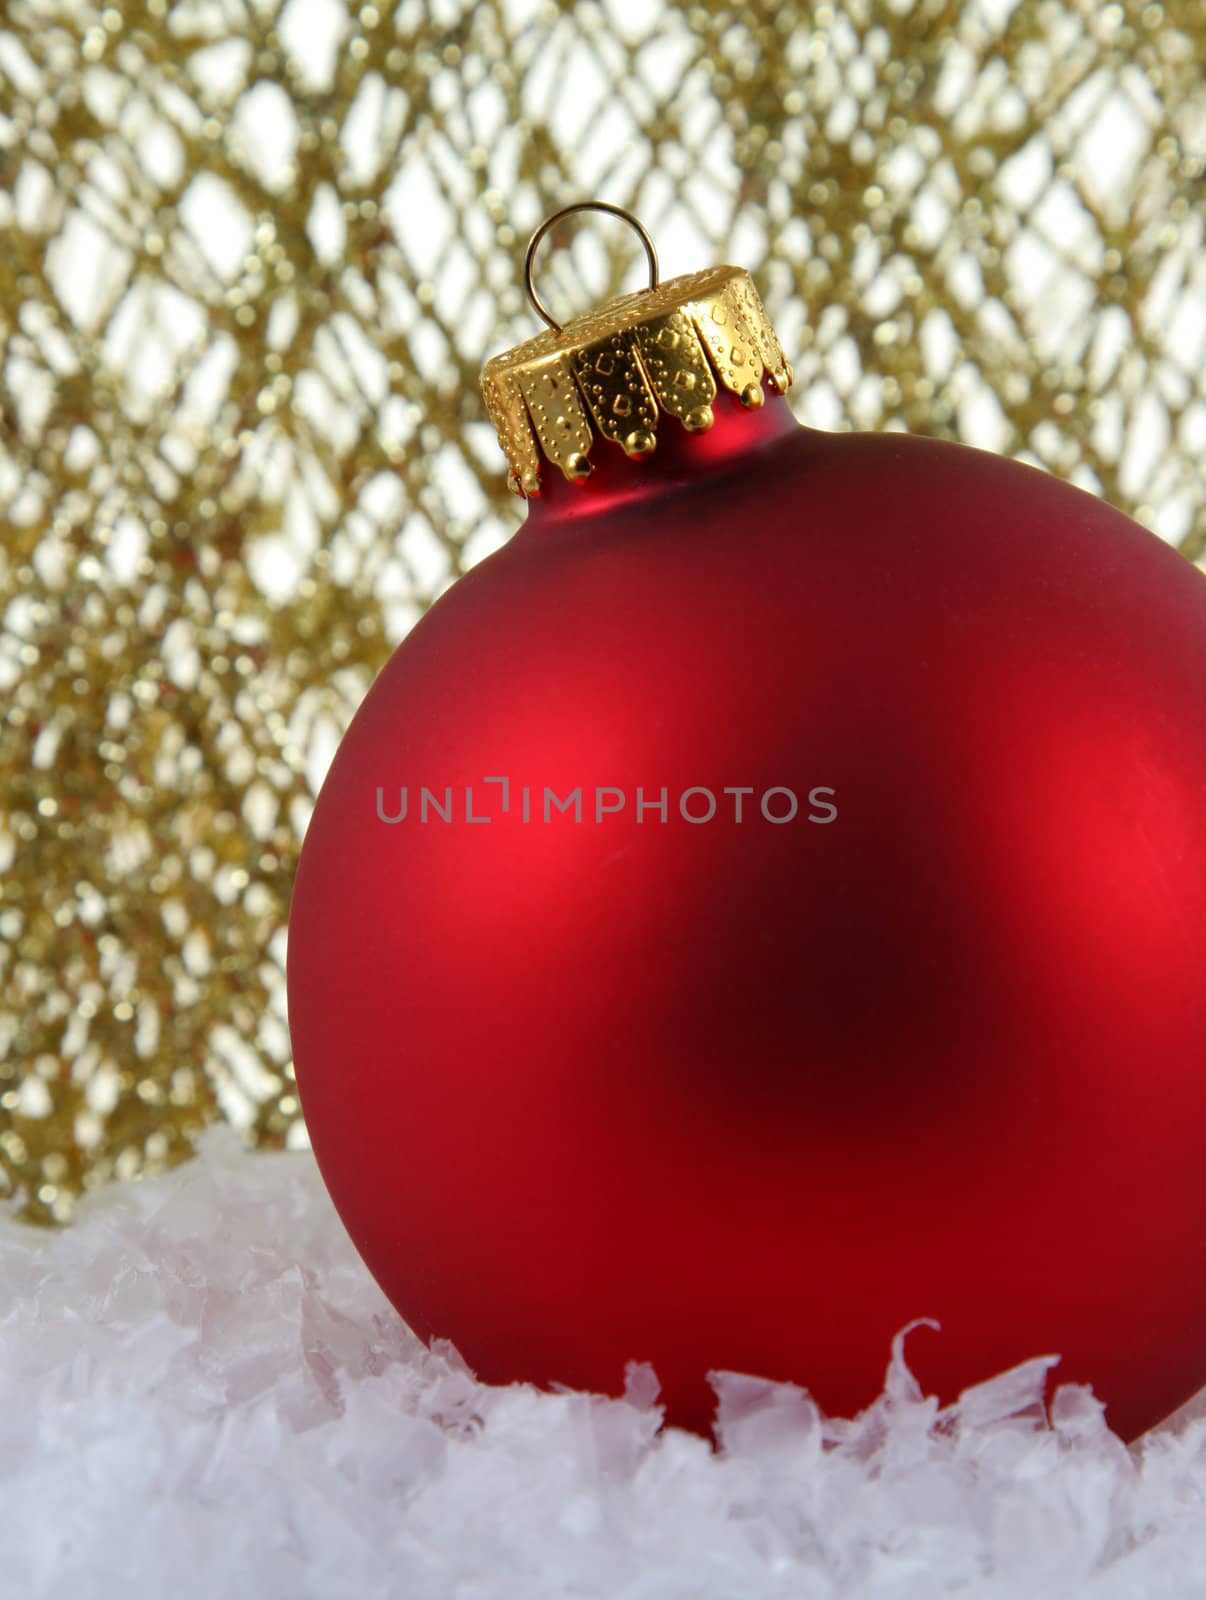 Red Bauble Backed by Gold Glittery Strings
 by ca2hill